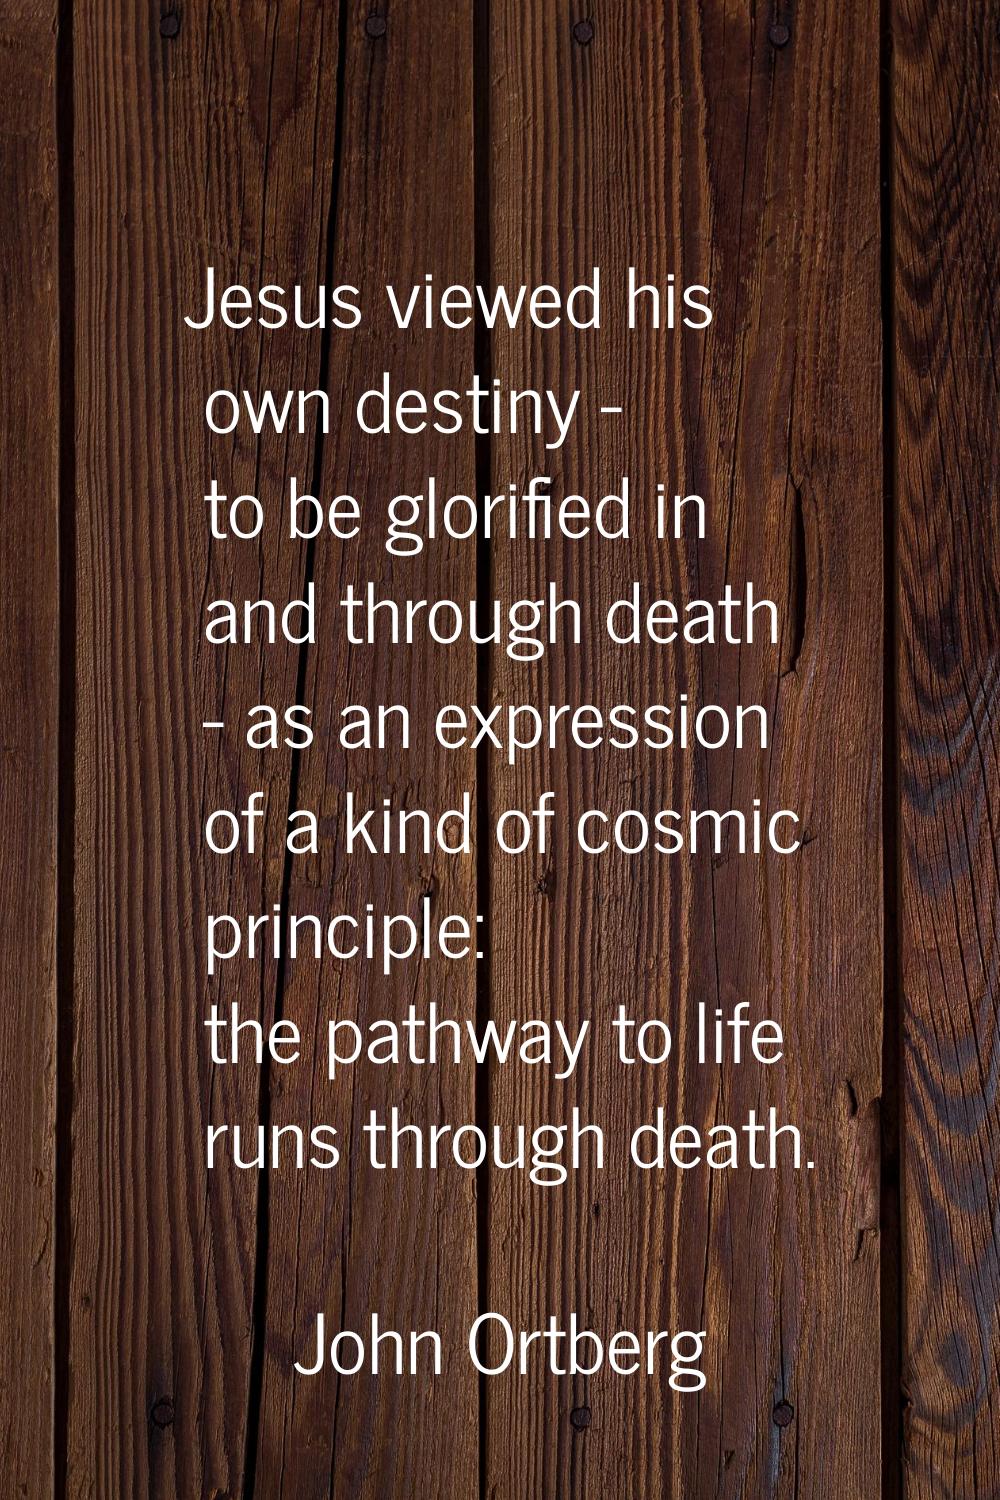 Jesus viewed his own destiny - to be glorified in and through death - as an expression of a kind of